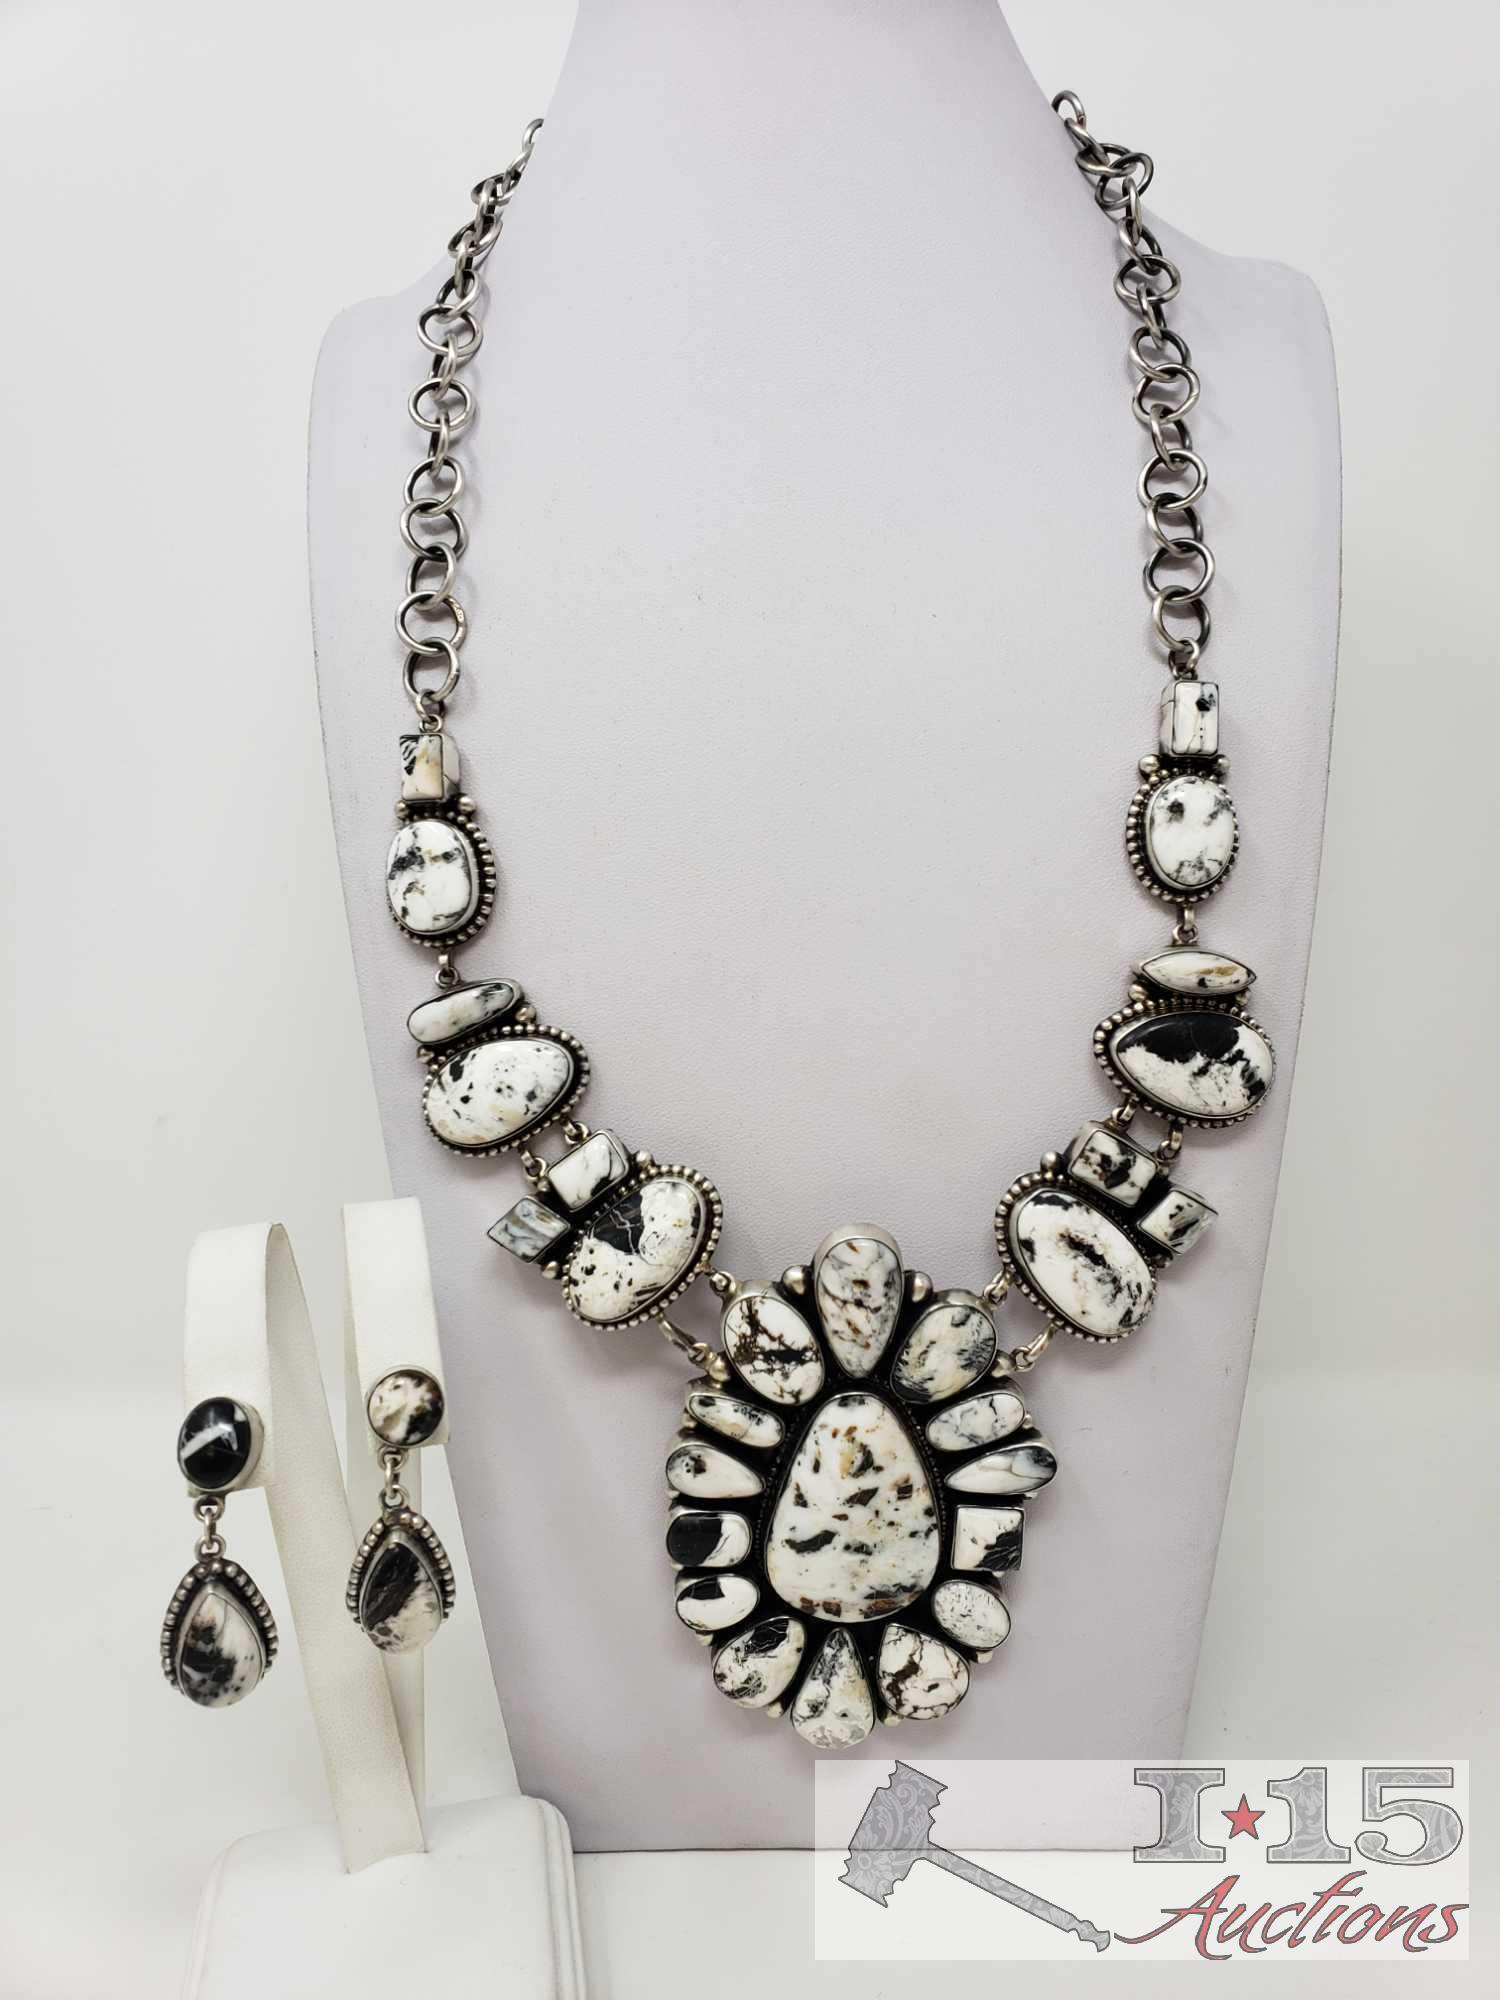 Rare Find Pansy Johnson White Buffalo Turquoise ONE OF A KIND Handmade Cluster Necklace